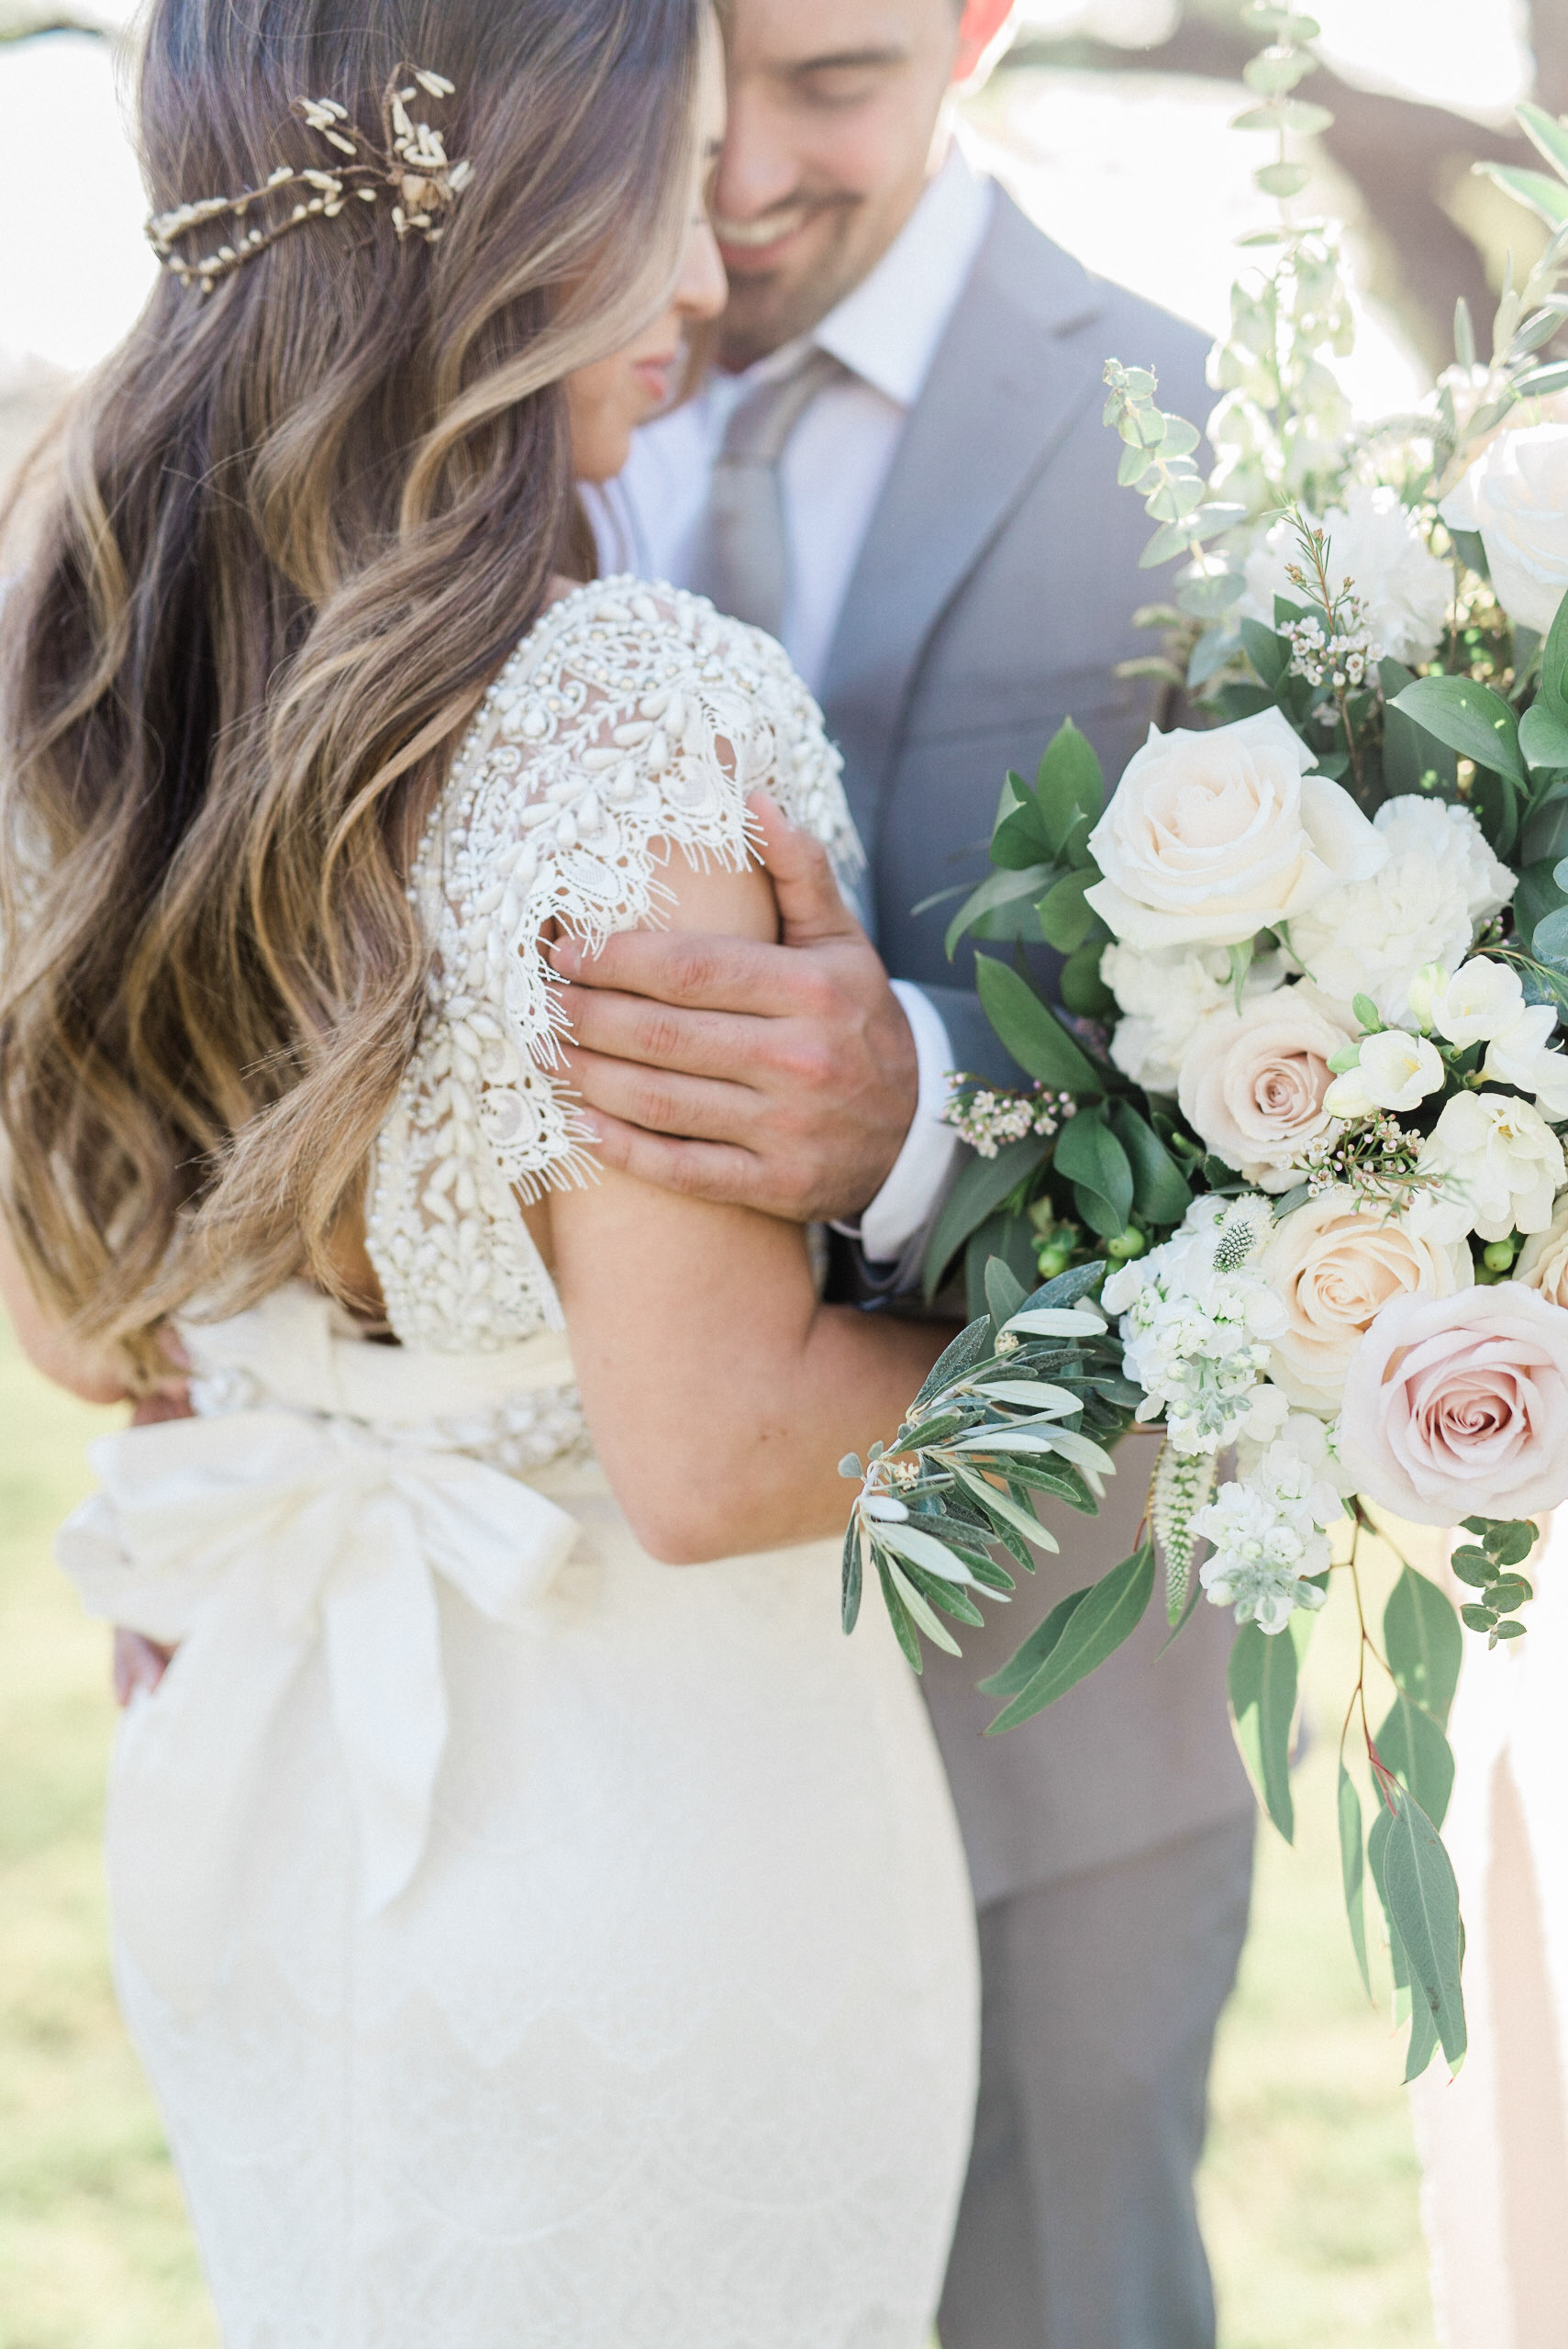 Bride and groom embracing, bride holding bouquet, both smiling.